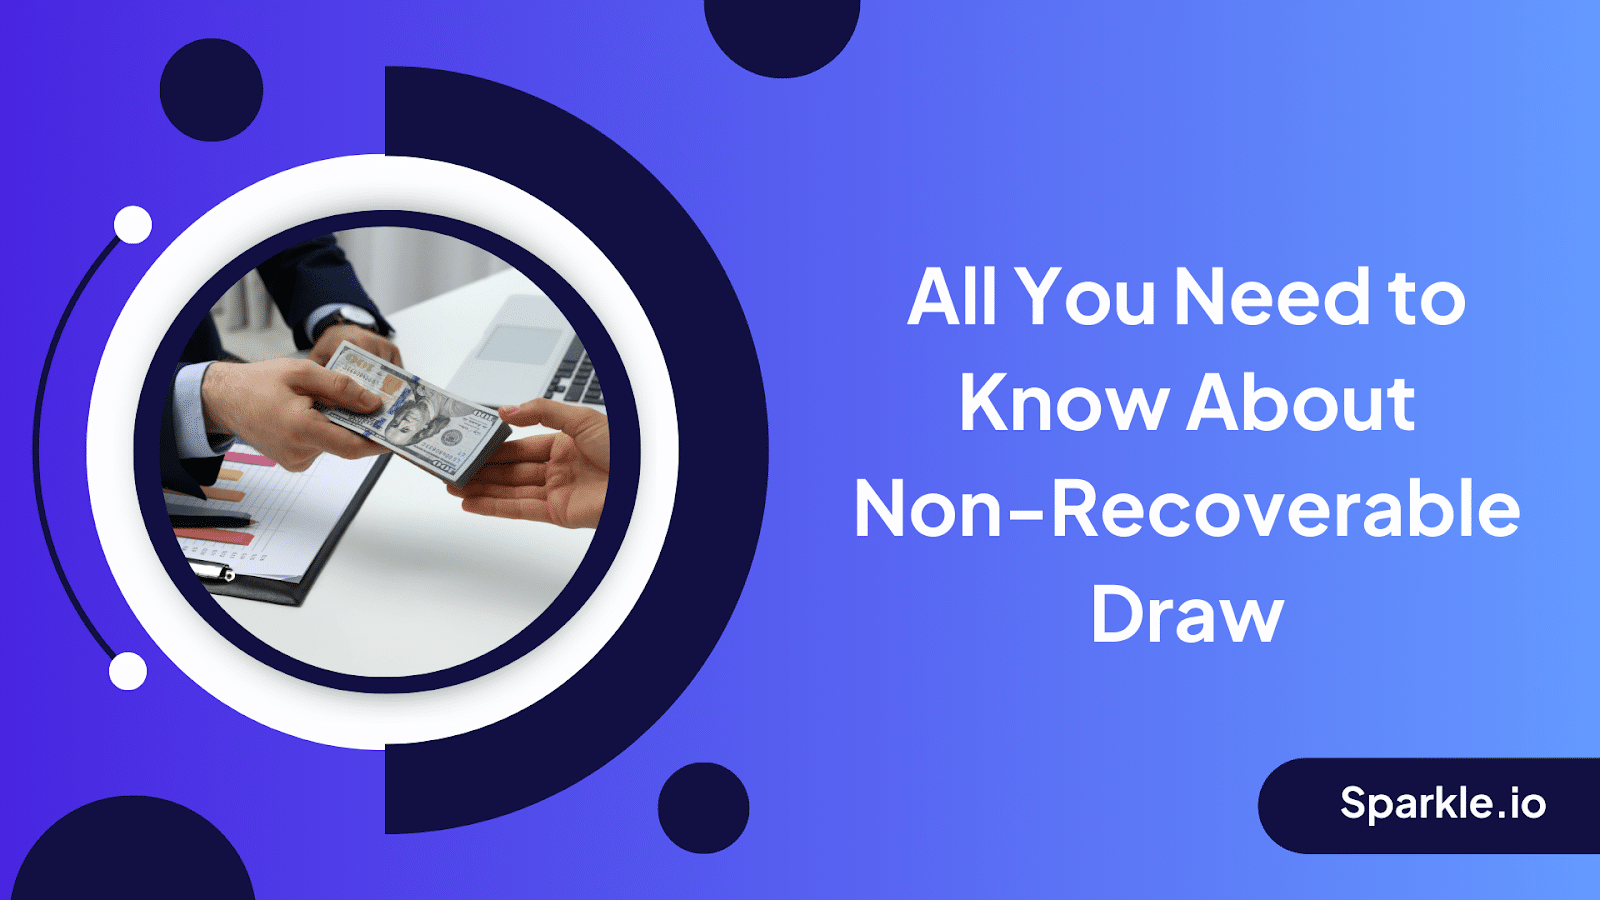 All You Need to Know About Non-Recoverable Draw